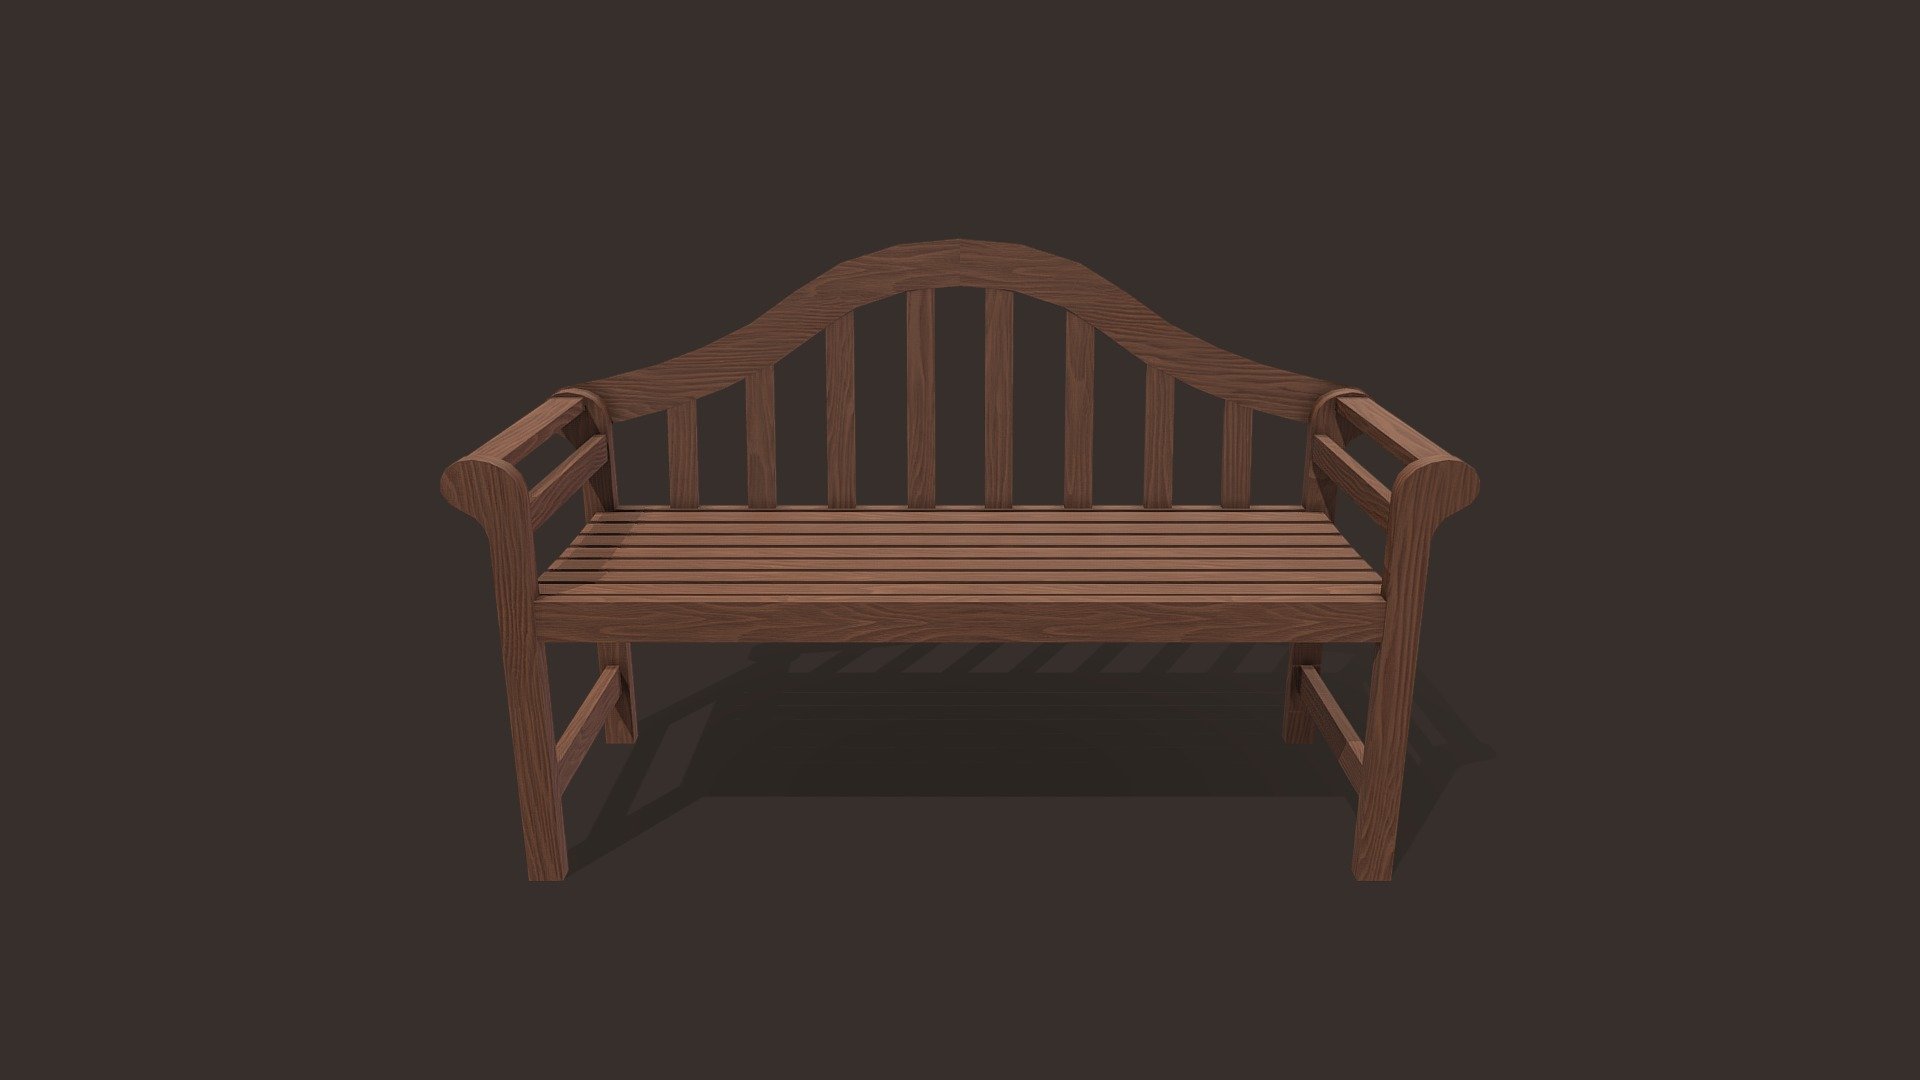 Park Bench  is a model that will enhance detail and realism to any of your rendering projects. The model has a fully textured, detailed design that allows for close-up renders, and was originally modeled in Blender 3.5, Textured in Substance Painter 2023 and rendered with Adobe Stagier Renders have no post-processing.

Features: -High-quality polygonal model, correctly scaled for an accurate representation of the original object. -The model’s resolutions are optimized for polygon efficiency. -The model is fully textured with all materials applied. -All textures and materials are included and mapped in every format. -No cleaning up necessary just drop your models into the scene and start rendering. -No special plugin needed to open scene.

Measurements: Units: M

File Formats: OBJ FBX

Textures Formats: PNG 4k - Park Bench - Buy Royalty Free 3D model by MDgraphicLAB 3d model